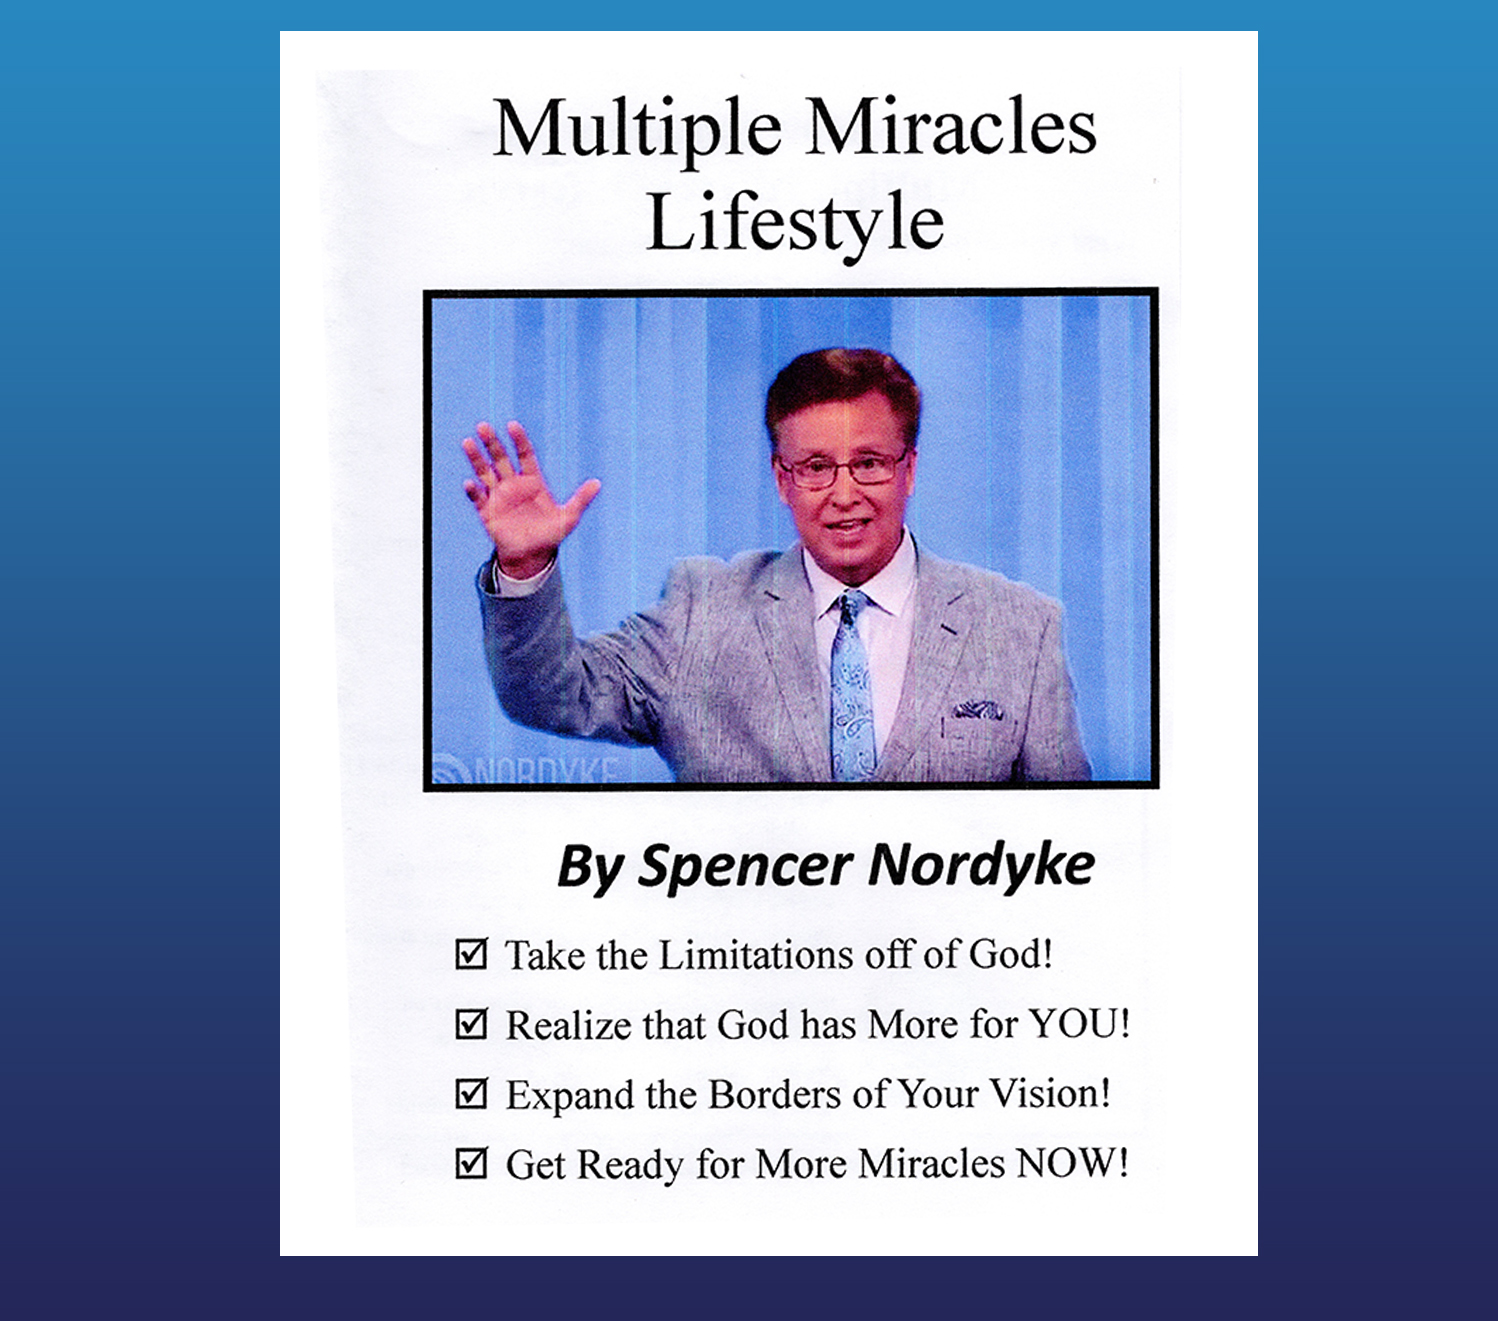 Multiple Miracles Lifestyle DVD